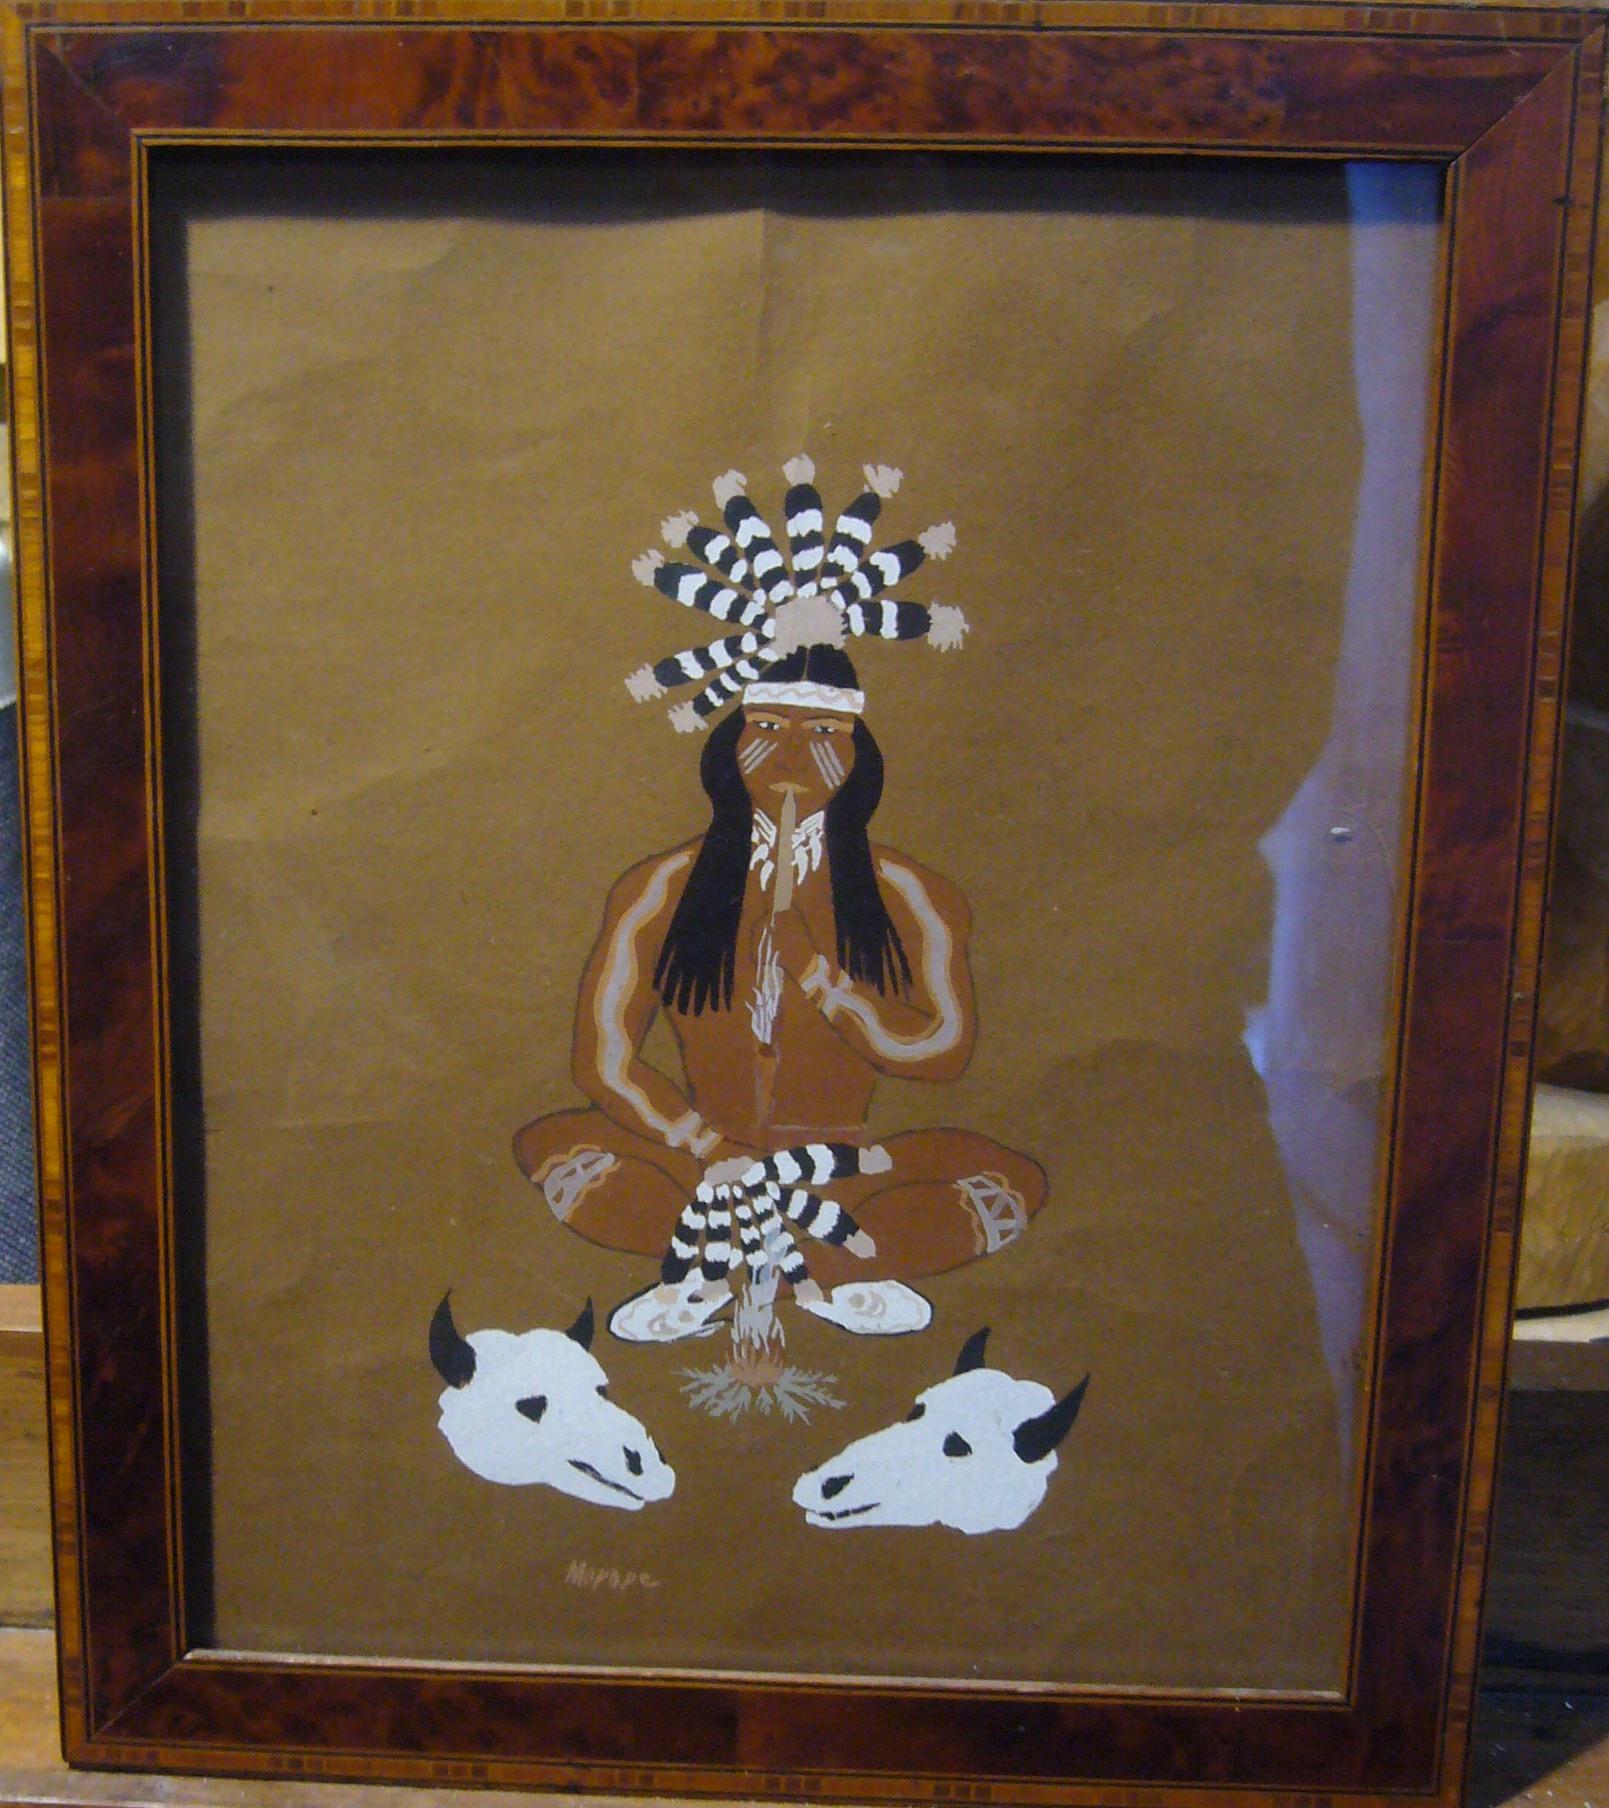 Indian Chief, 30's - gouache, 29x23 cm., framed - Painting by Stephen Mopope